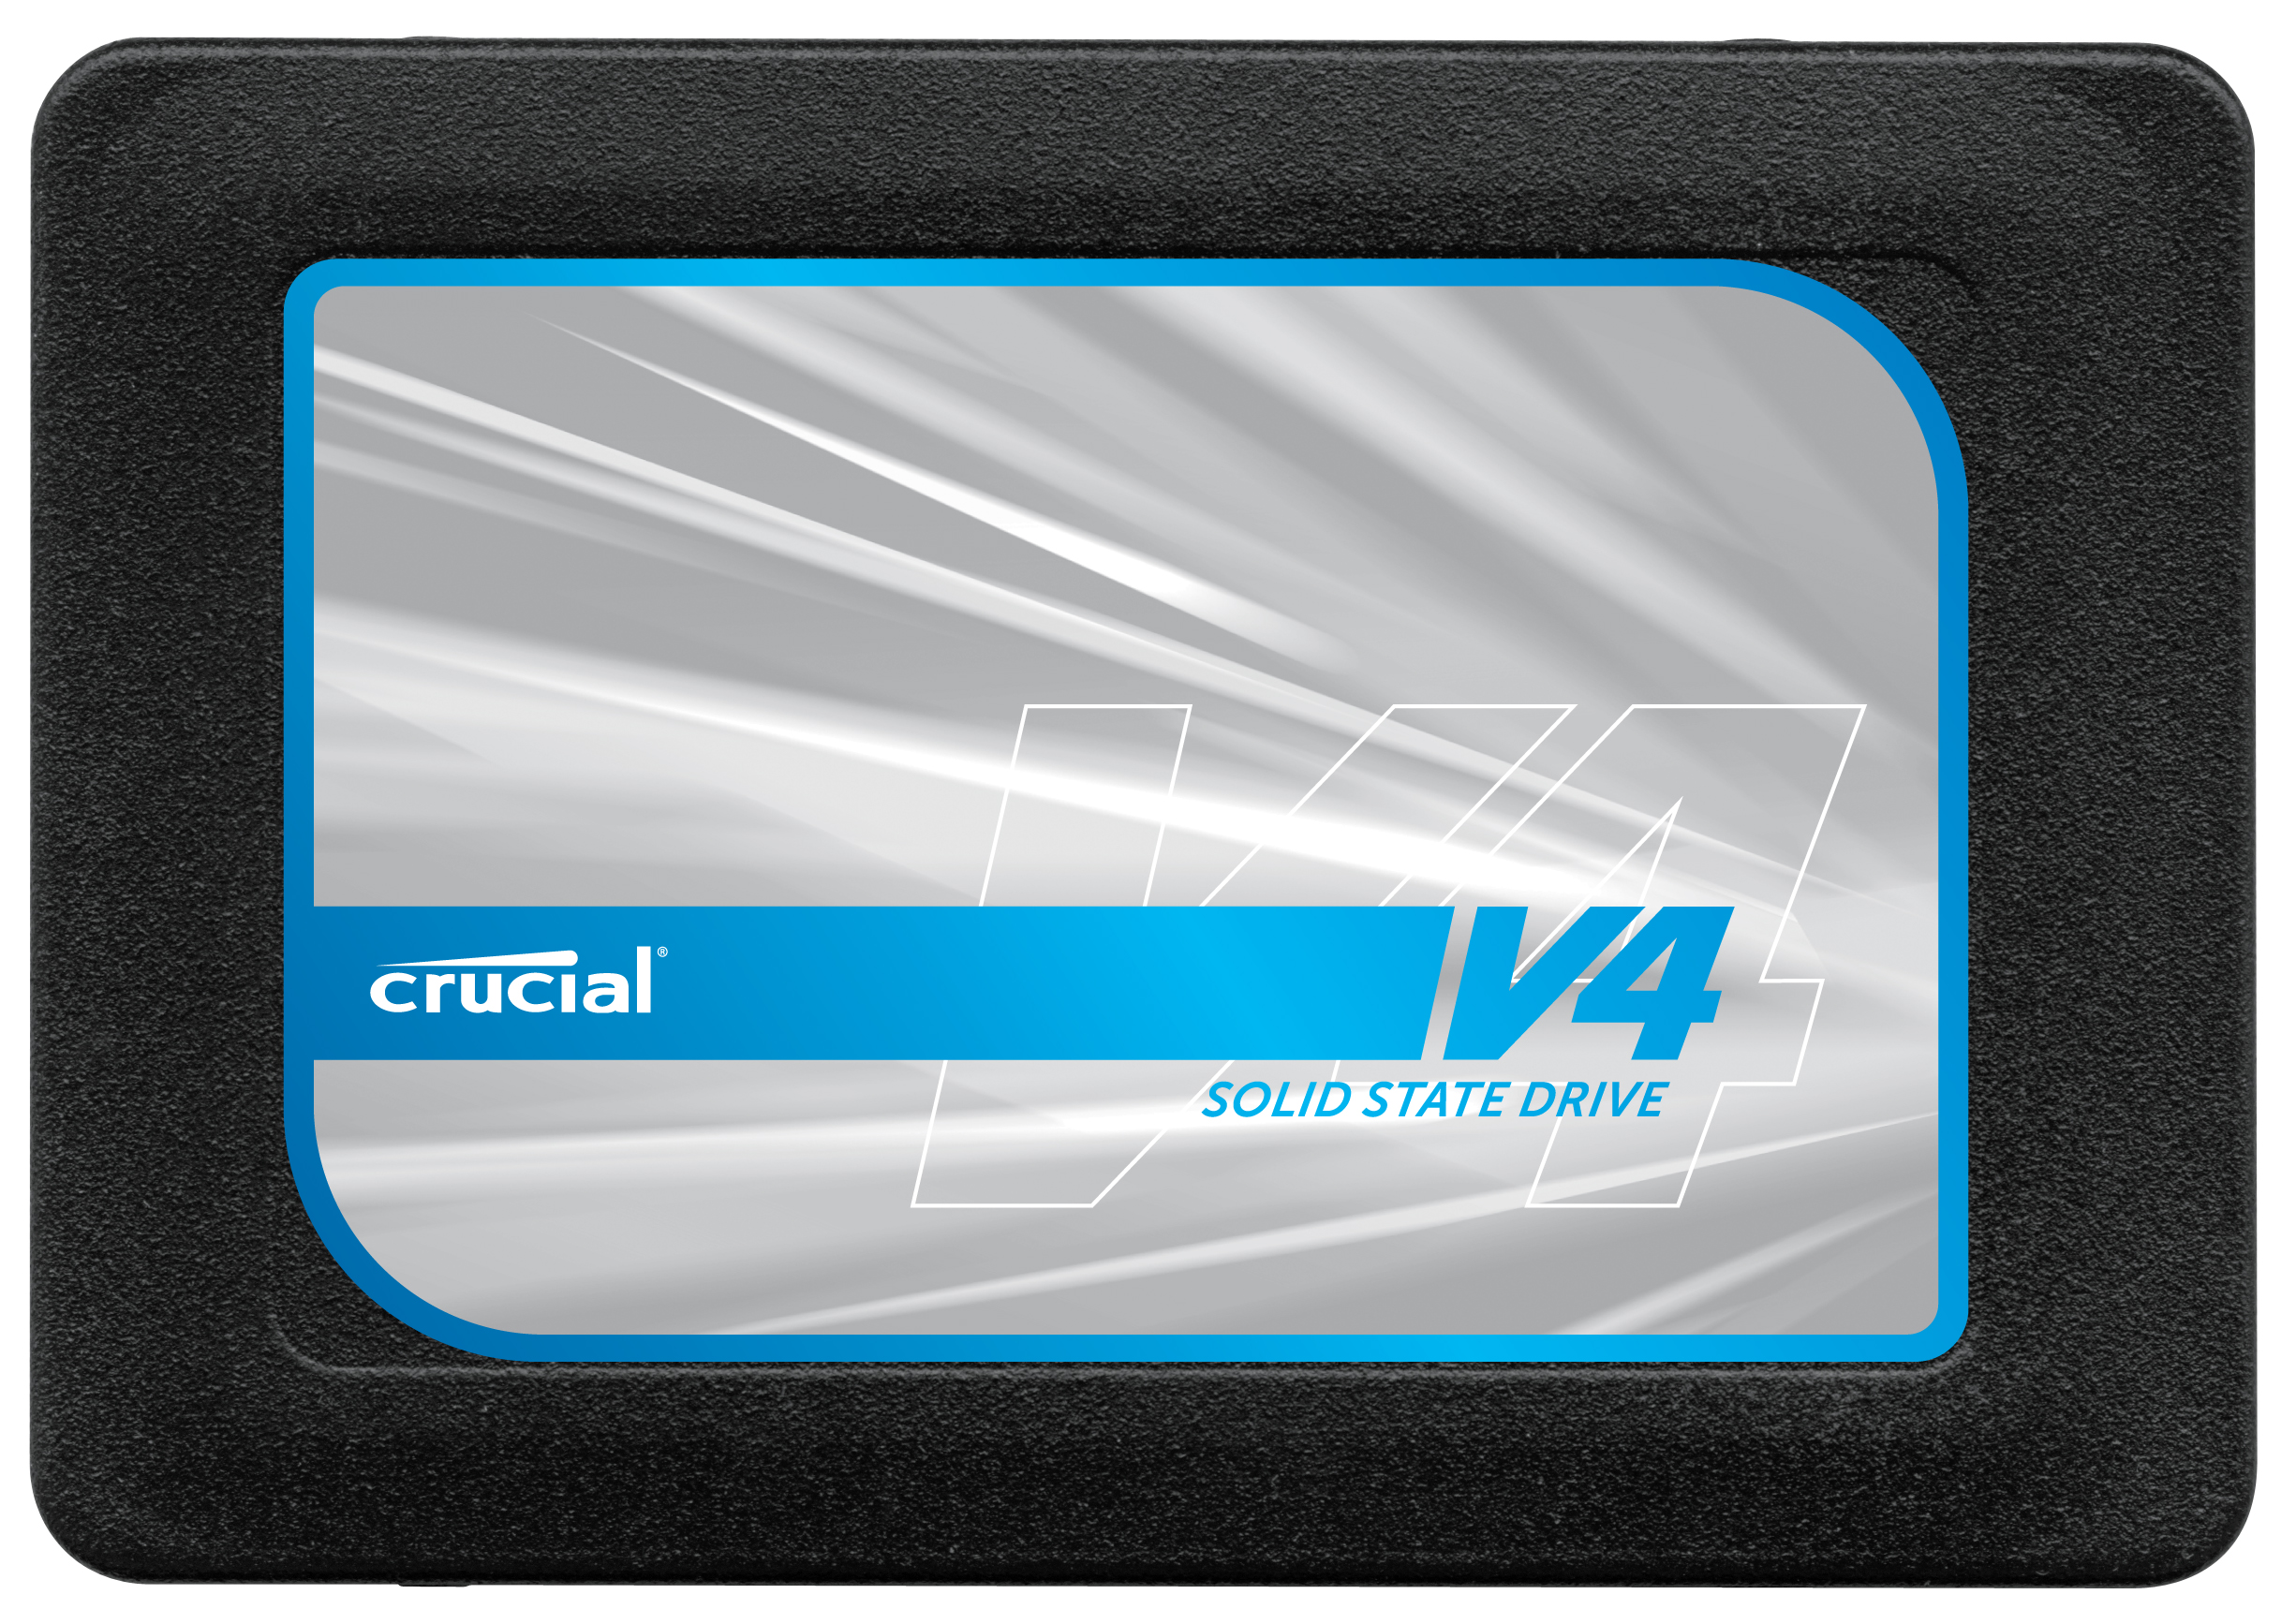 CT256V4SSD2BAA Crucial V4 Series 256GB MLC SATA 3Gbps 2.5-inch Internal Solid State Drive (SSD) with 3.5-inch Adapter Kit